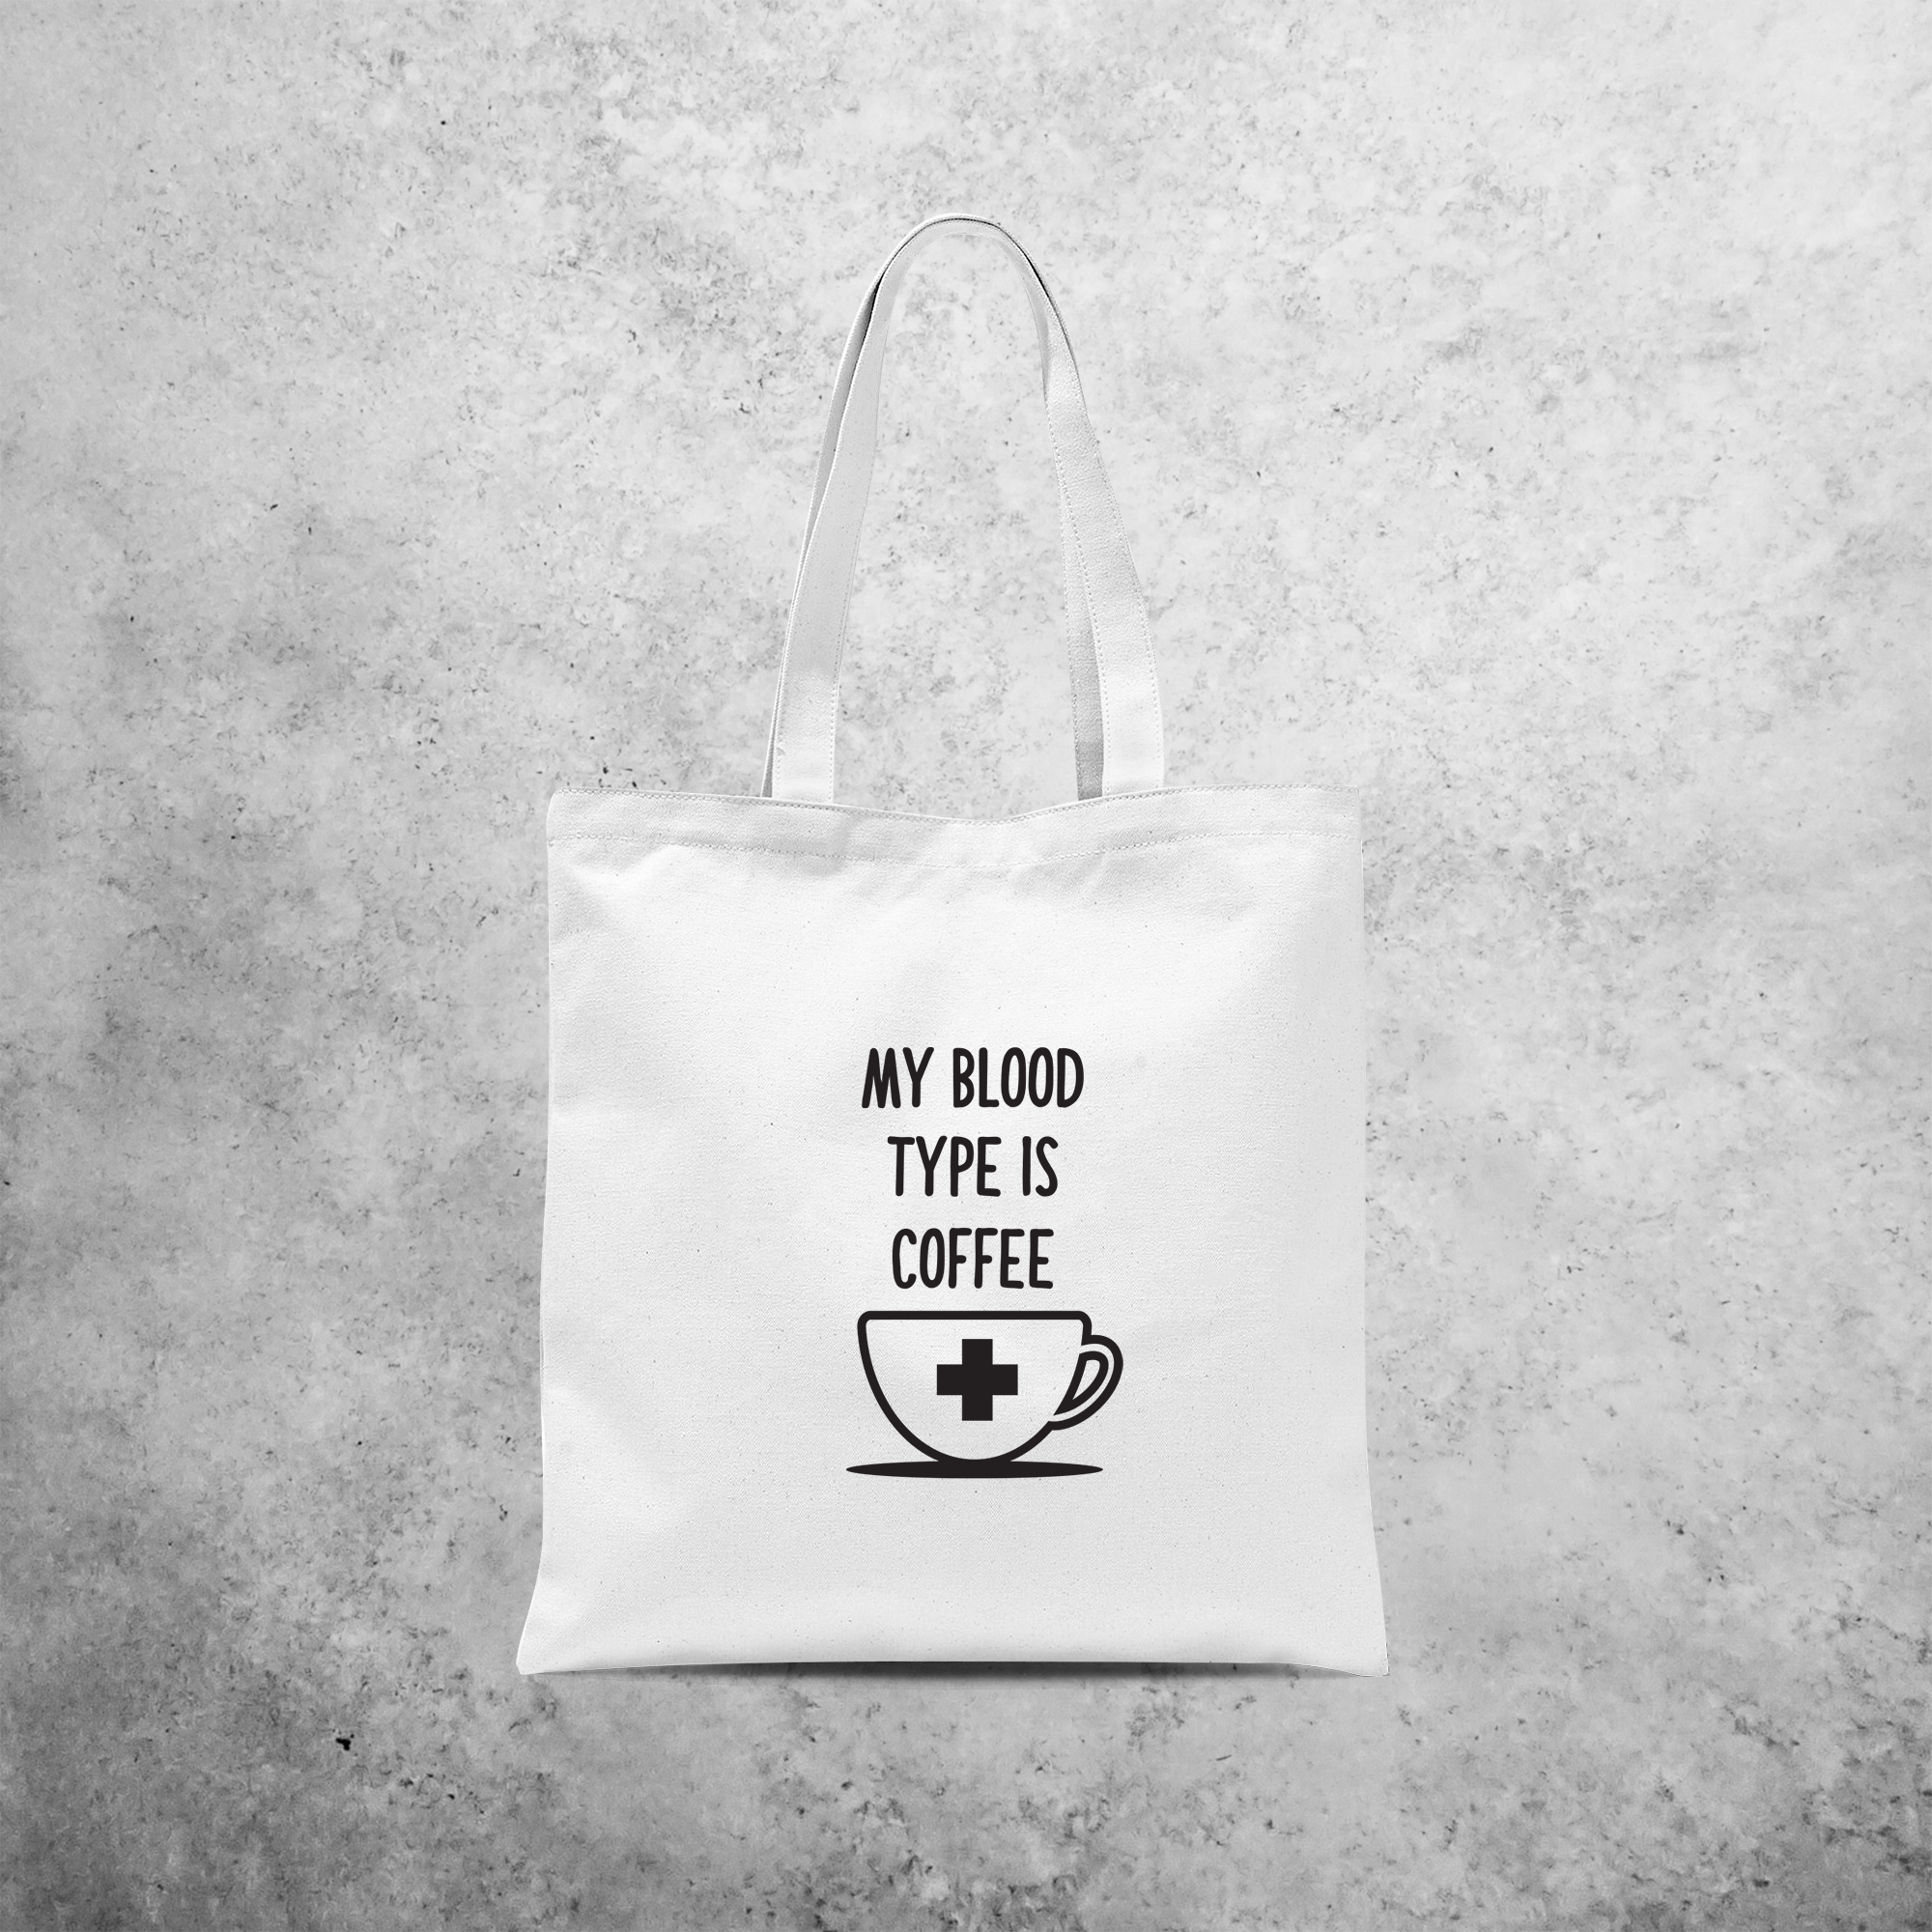 'My blood type is coffee' tote bag